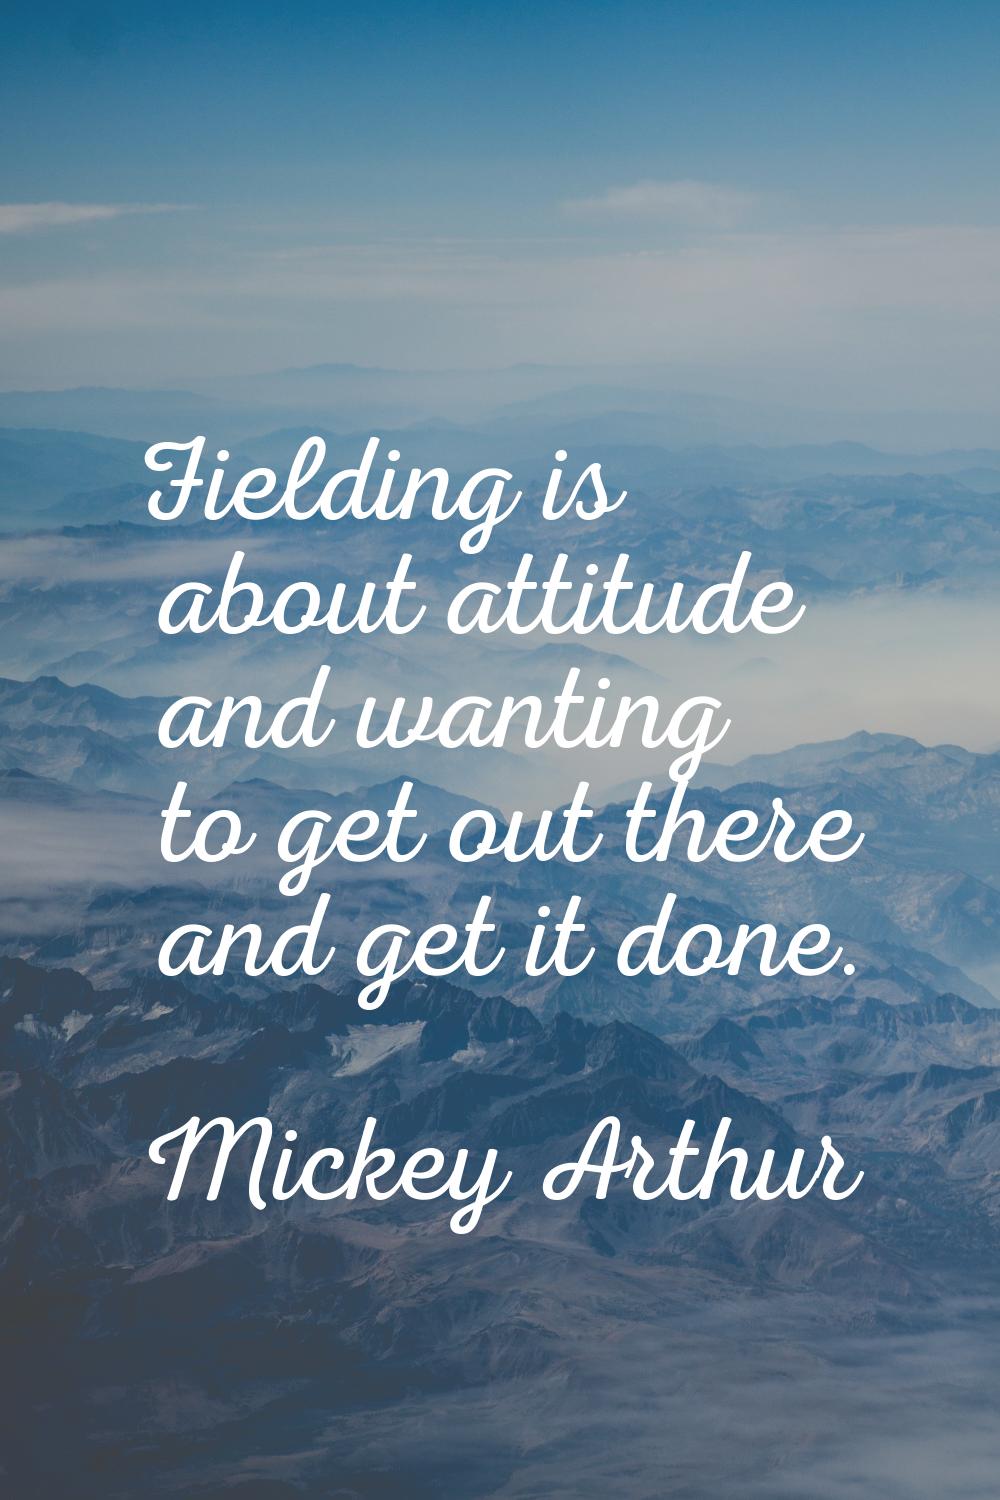 Fielding is about attitude and wanting to get out there and get it done.